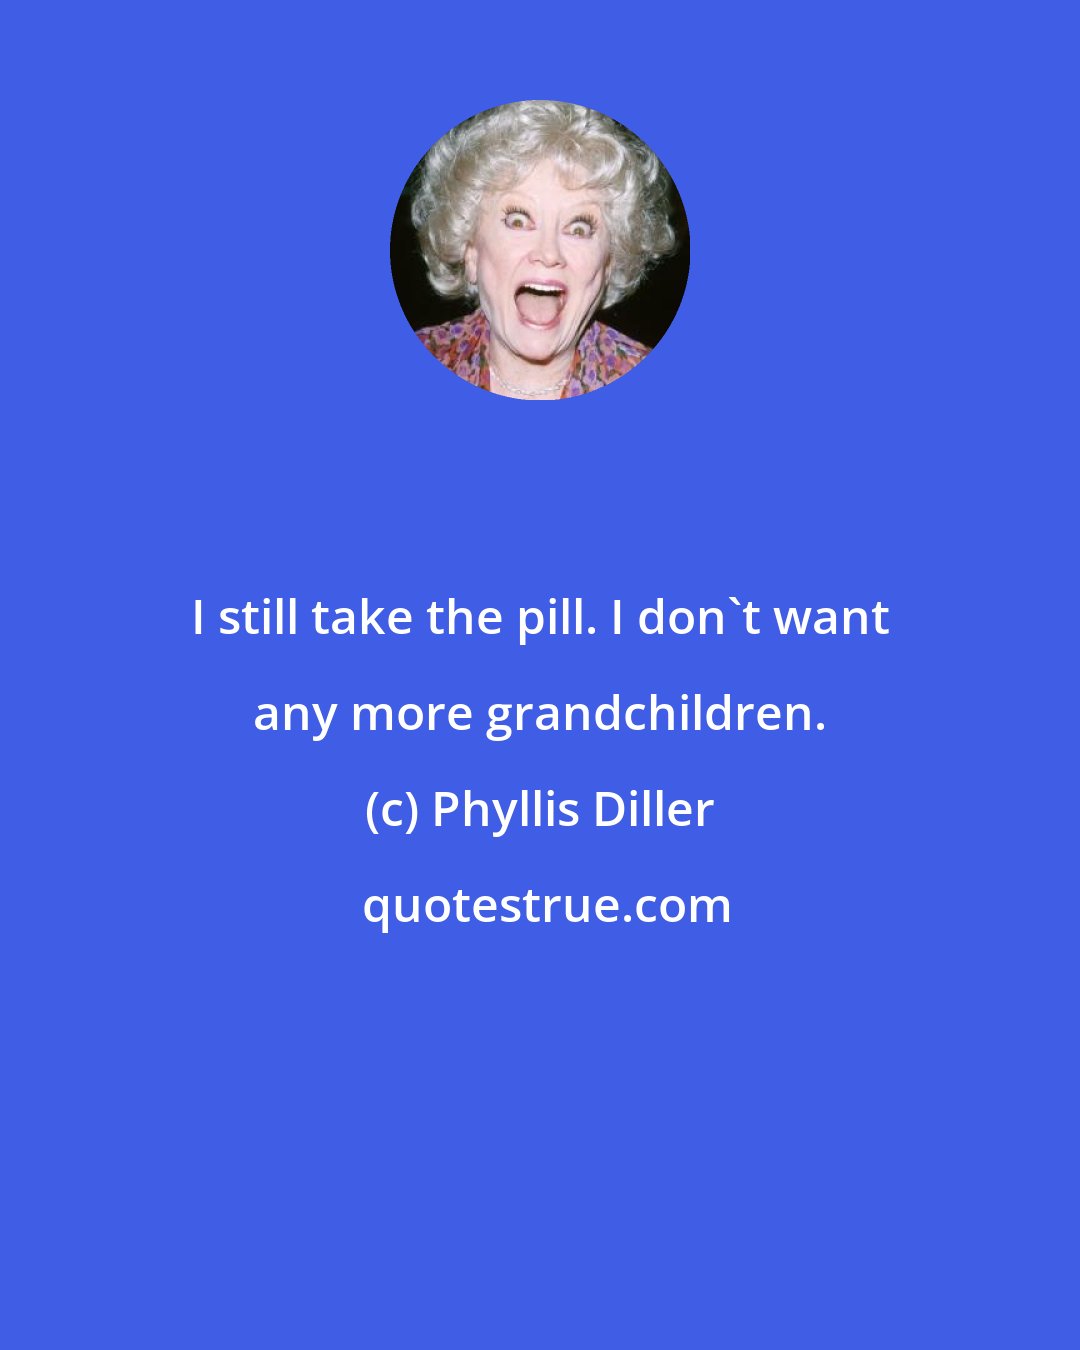 Phyllis Diller: I still take the pill. I don't want any more grandchildren.